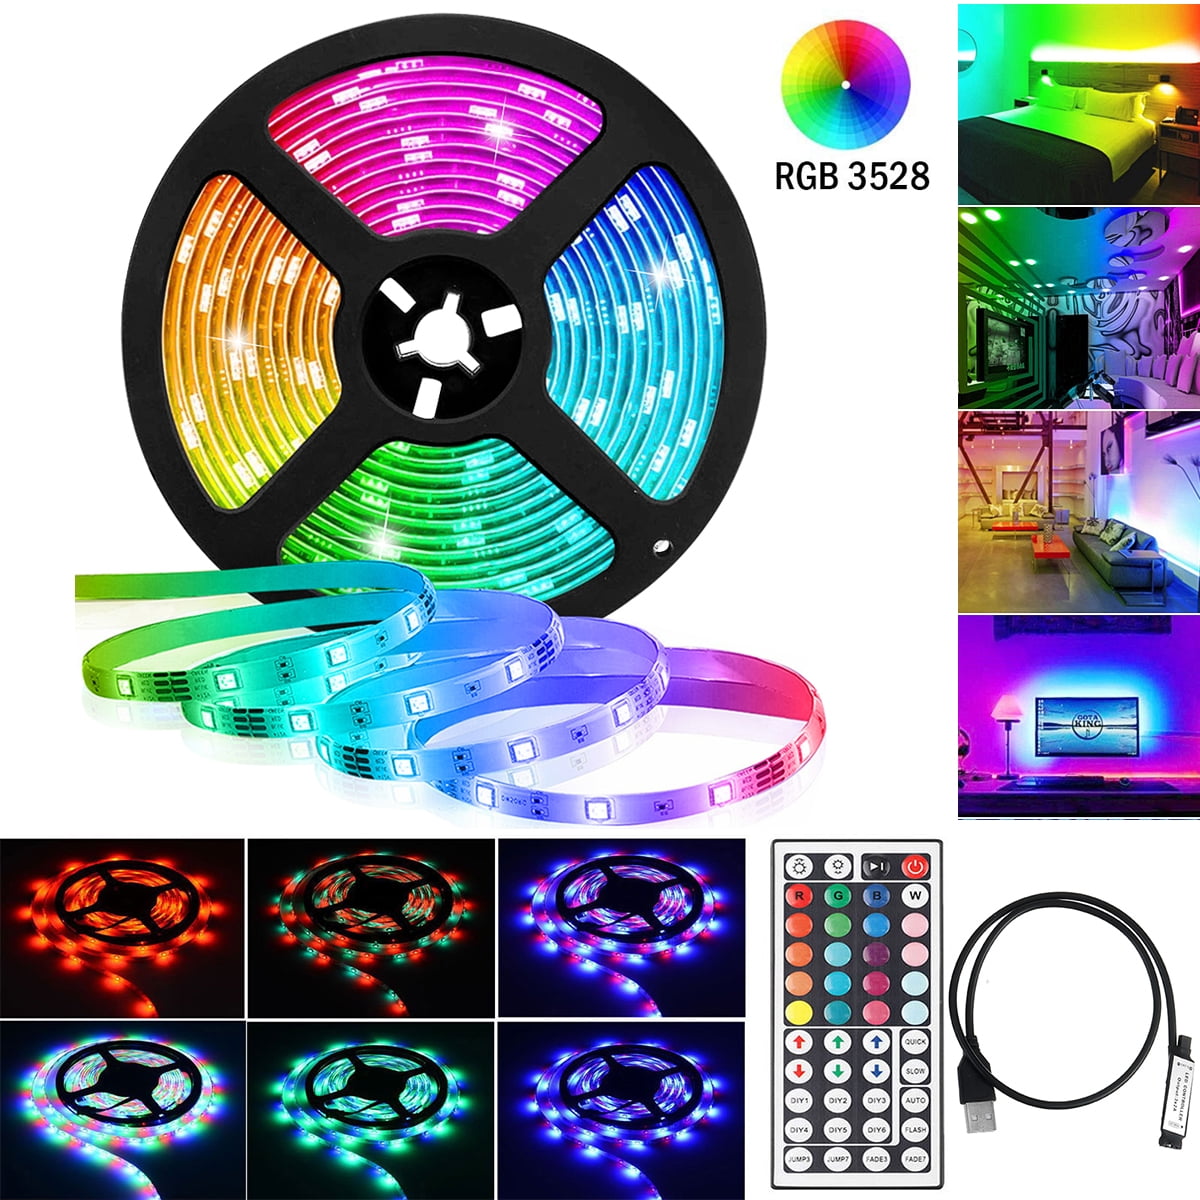 Home Theater Theatre shelf LED Lighting Strip SMD 3528 300 LEDs 20/ft YELLOW 